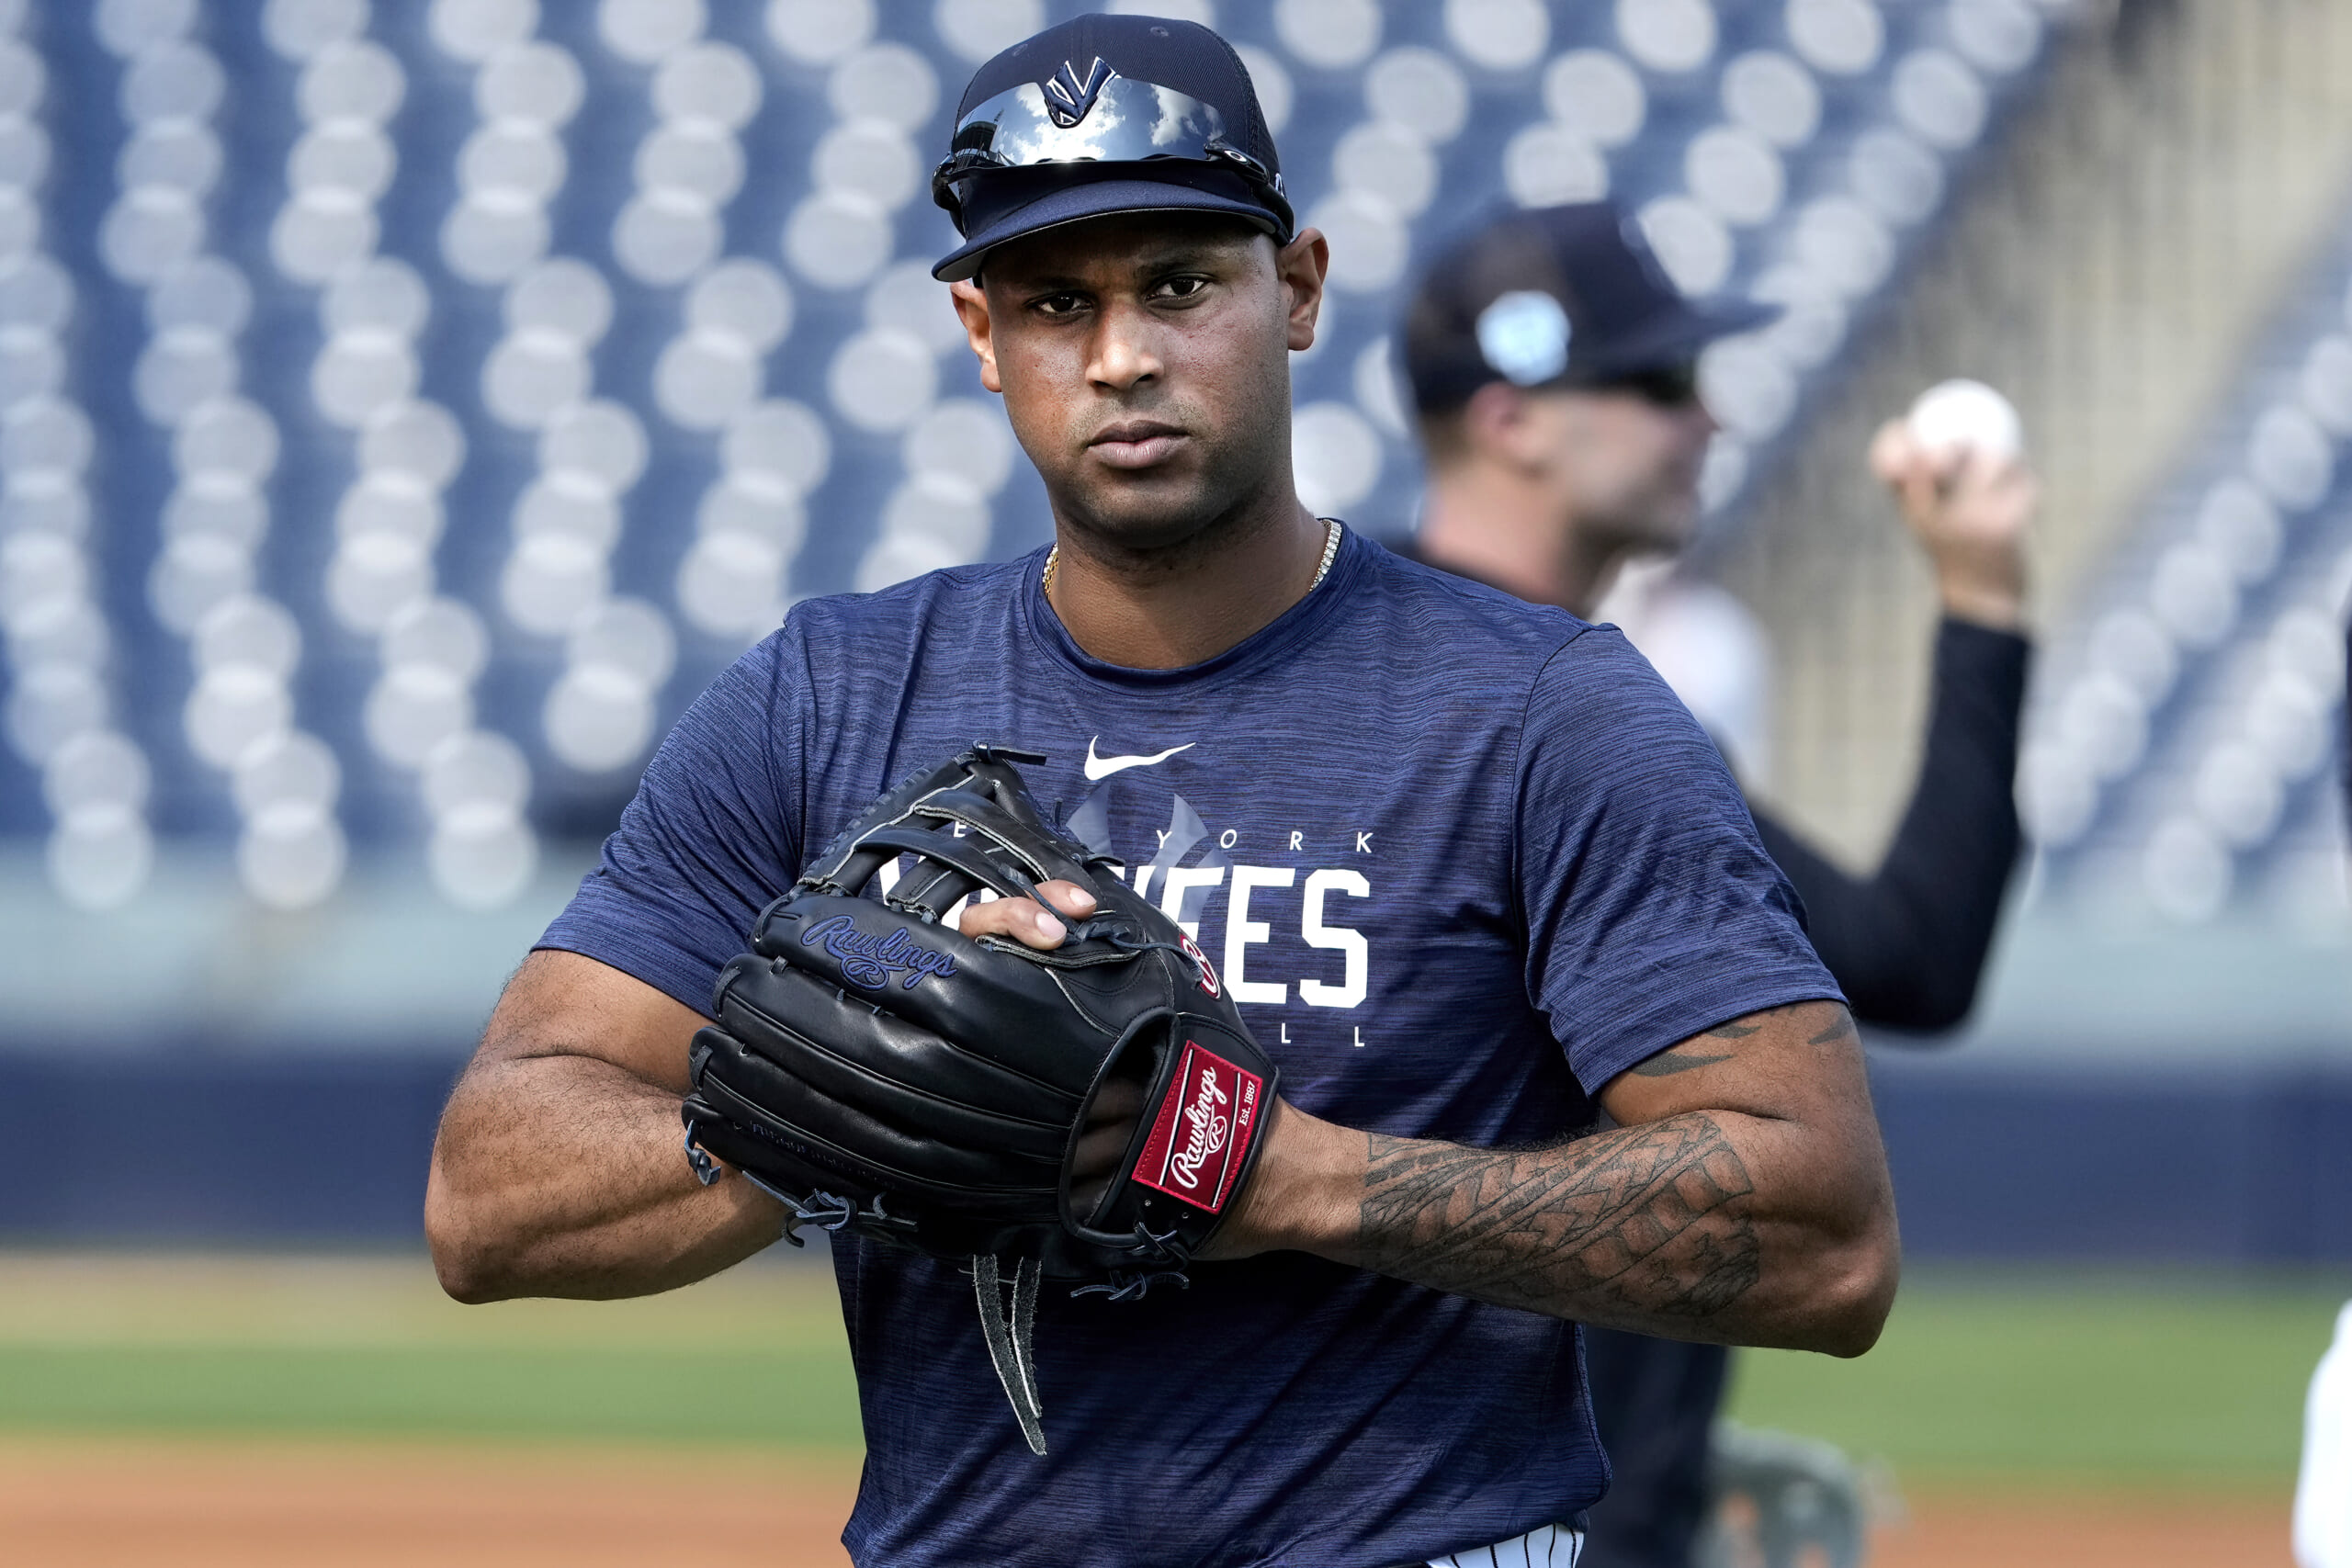 Daunte Wright shooting: Aaron Hicks of New York Yankees elects not